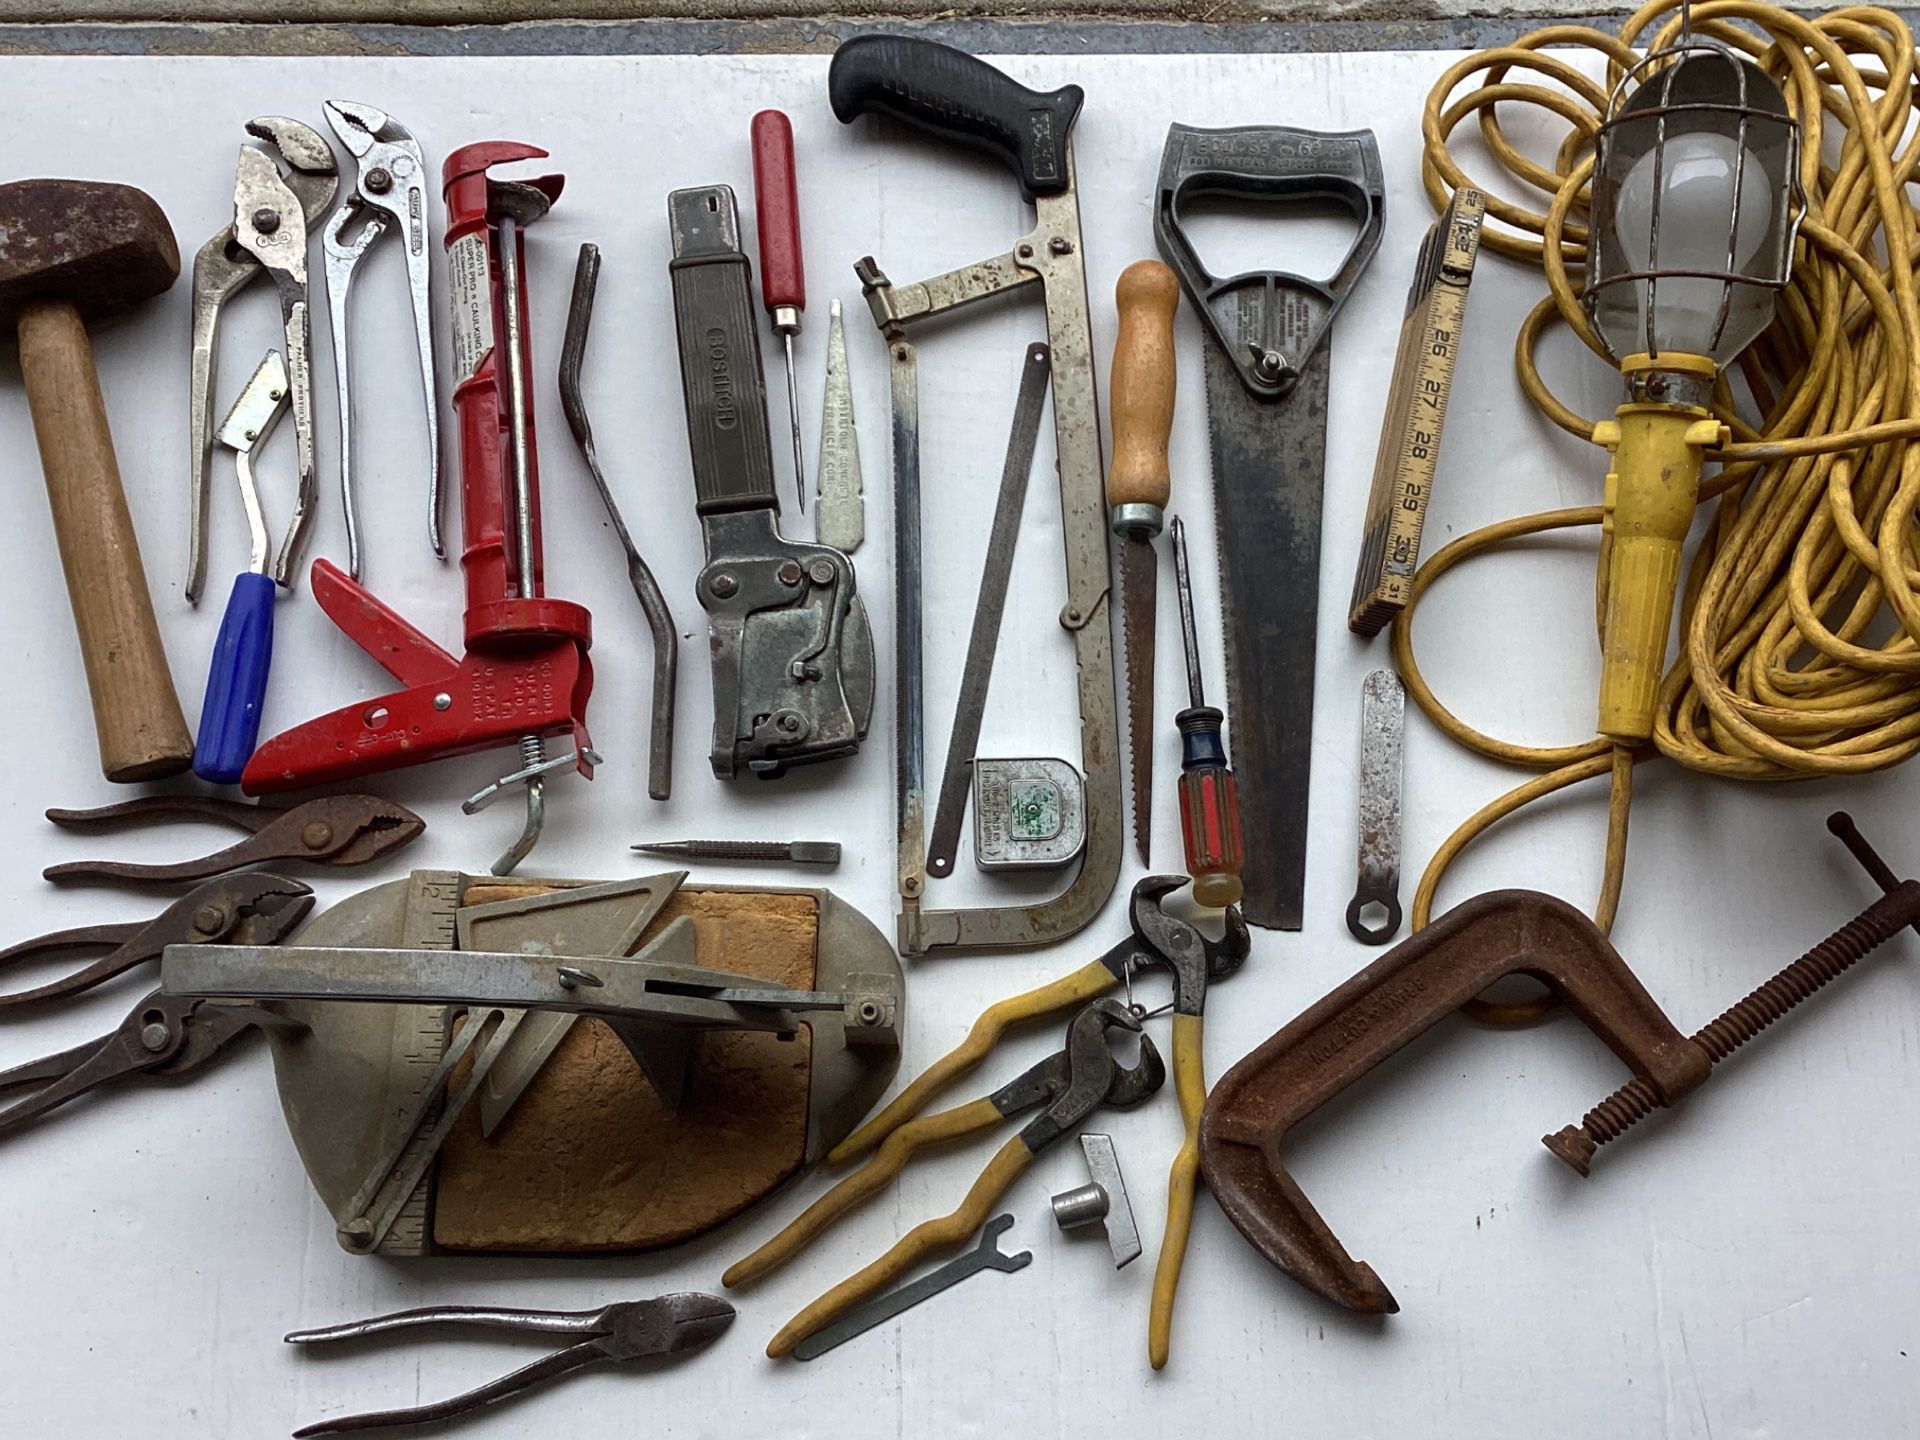 Vtg. 25+ Assorted Tools, C-clamp,Pliers, Caulking Gun, Tile Snips,Tile Cutter,Foldout Wood Ruler,Mallet,Saws,Shop Metal Cage Lamp etc. Preowned